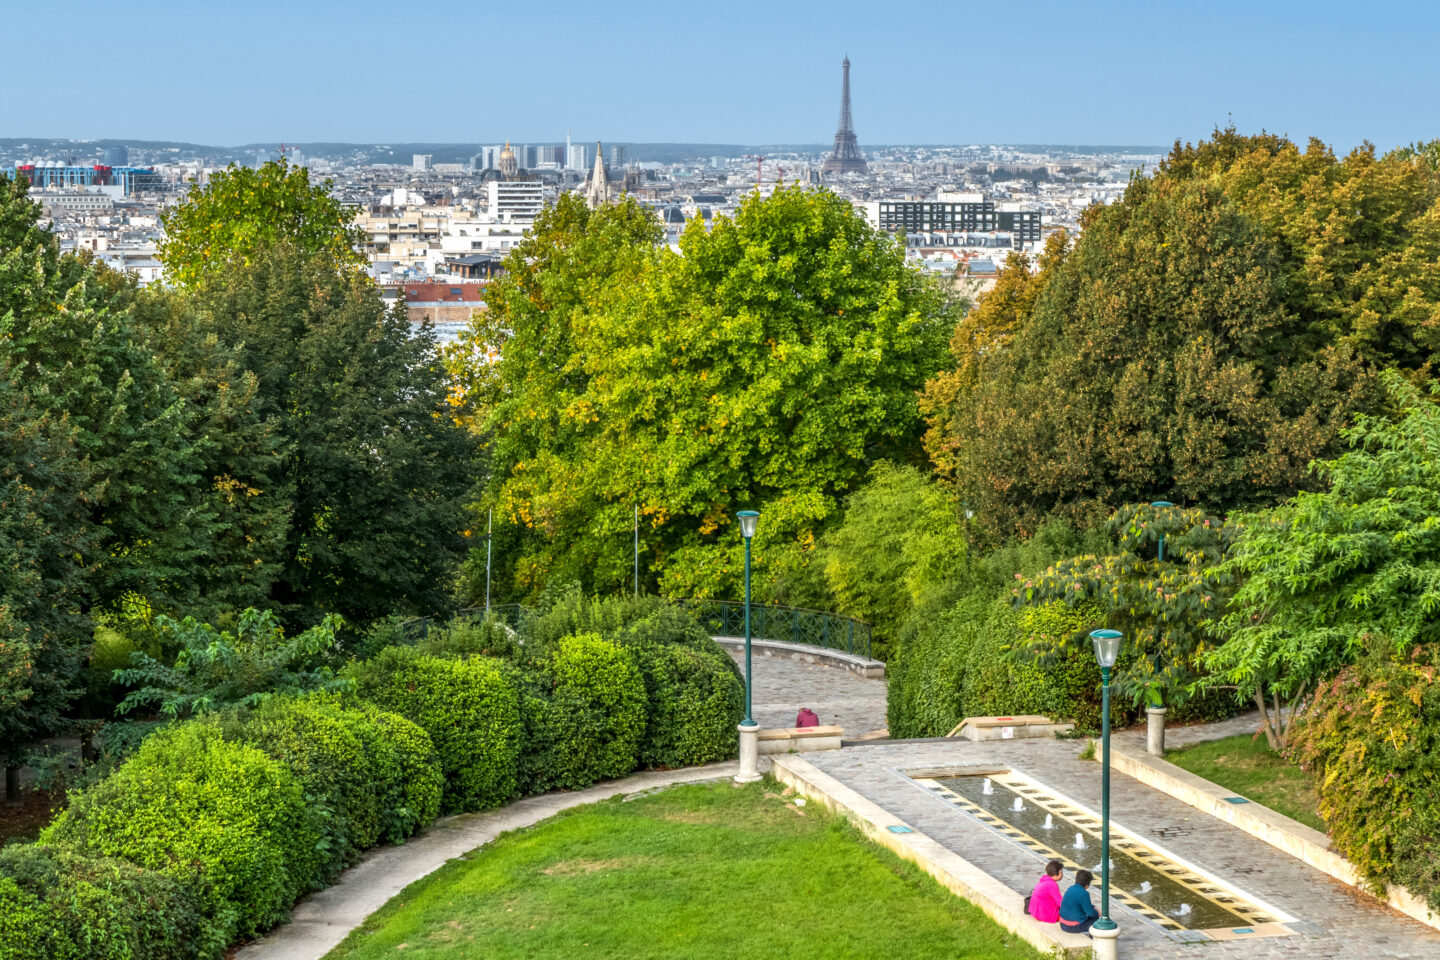 Best Viewpoints In Paris: The park of Belleville with the panorama of Paris in the background